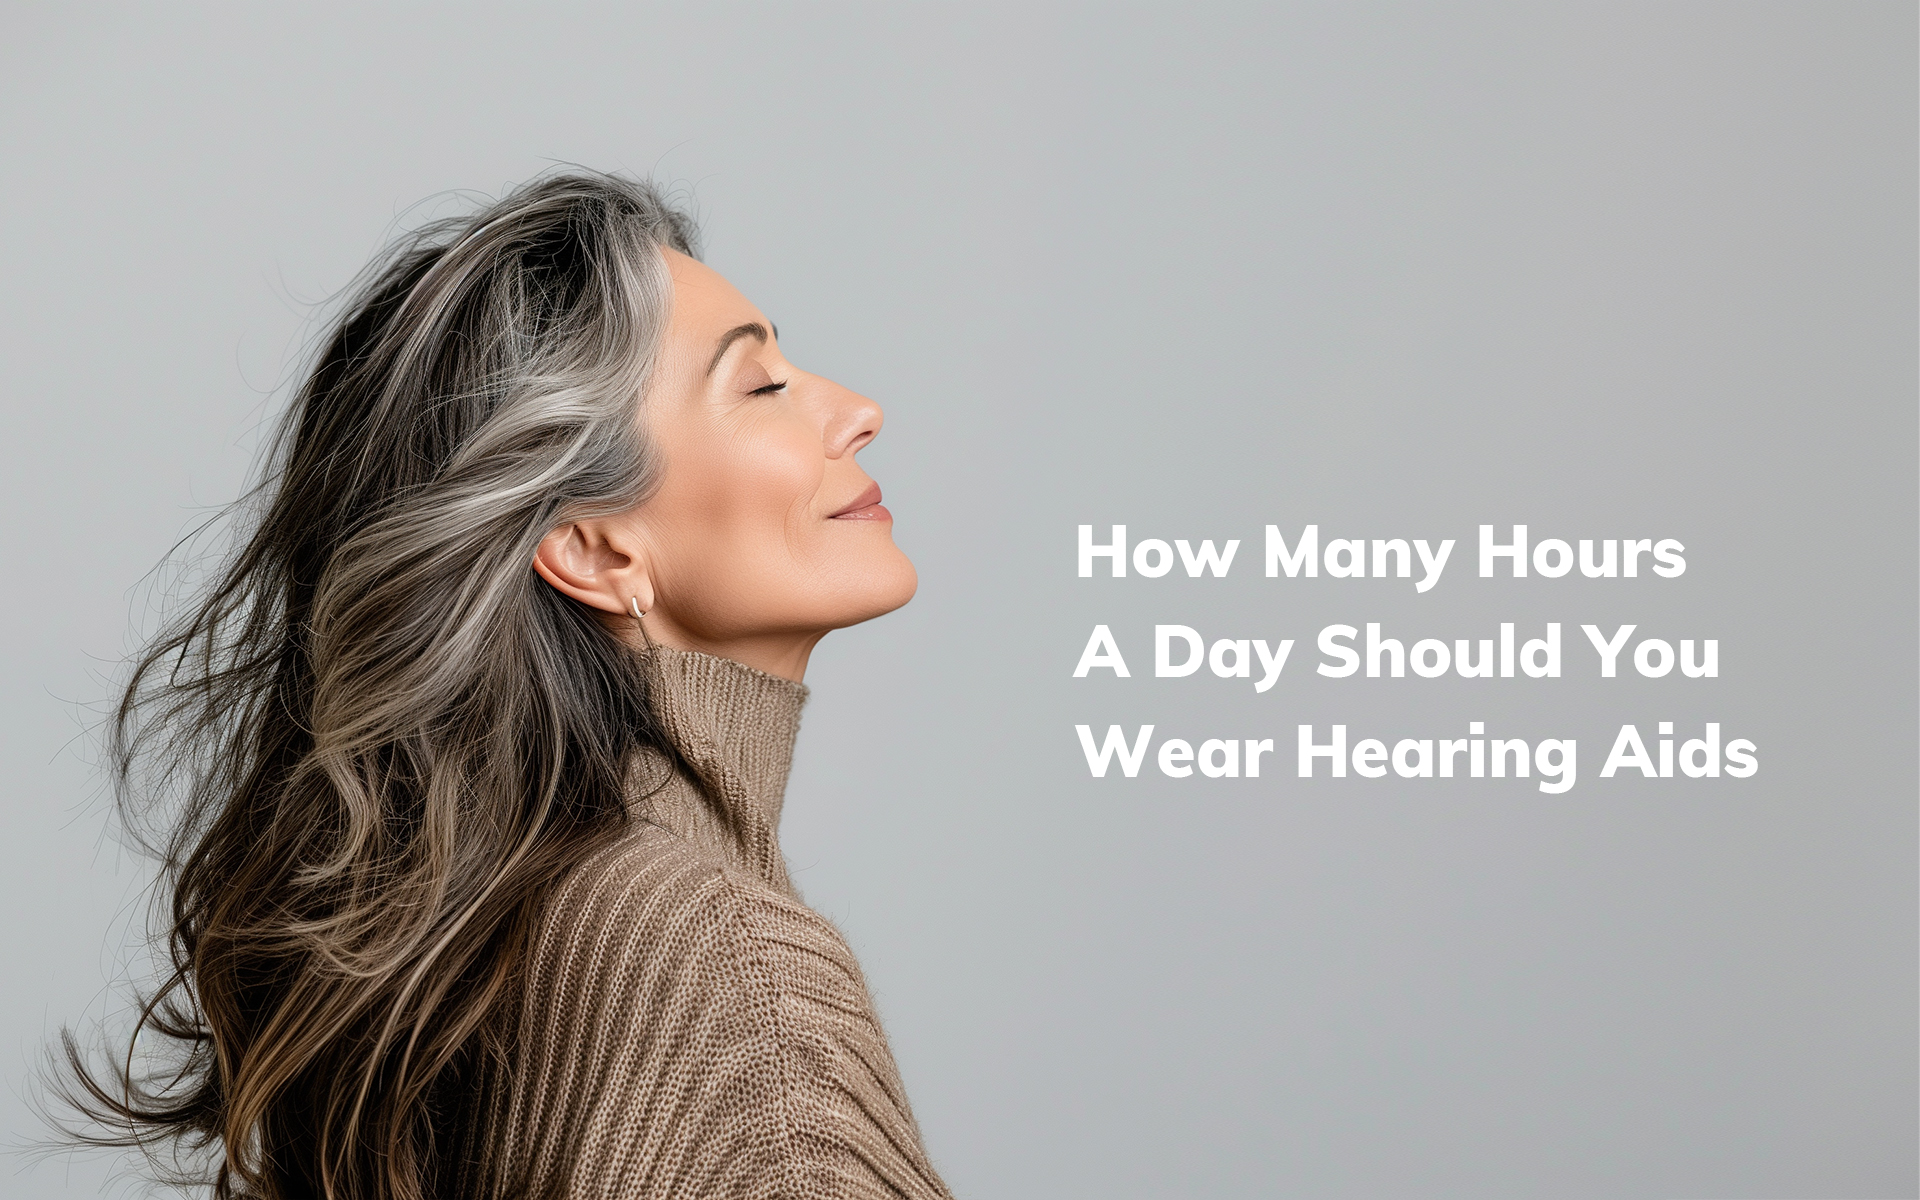 How Many Hours a Day Should You Wear Hearing Aids?